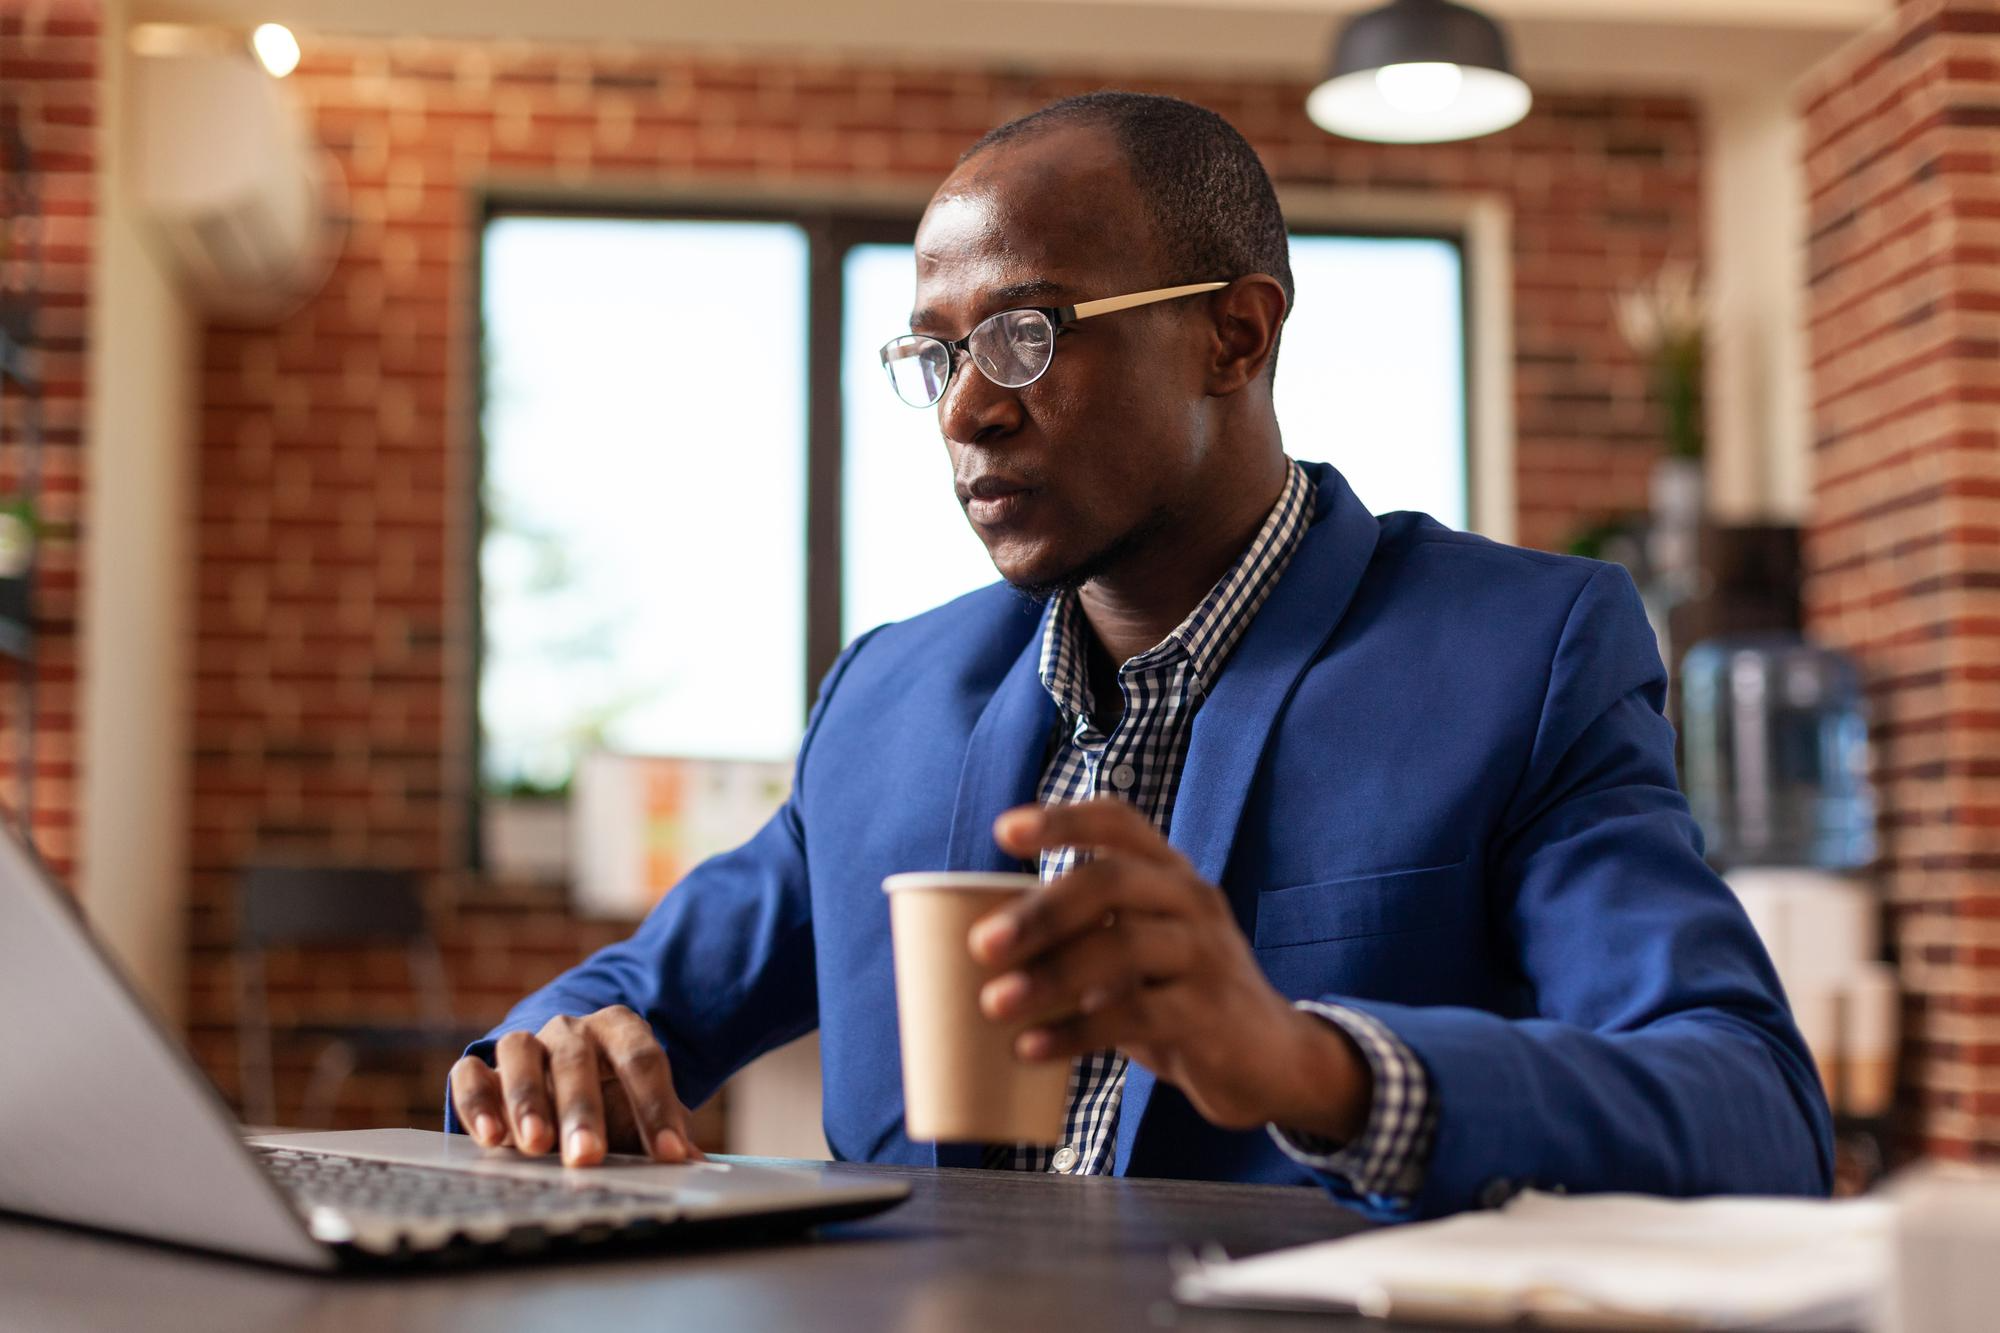 African Man in a blue suit holding a cup and on a laptop